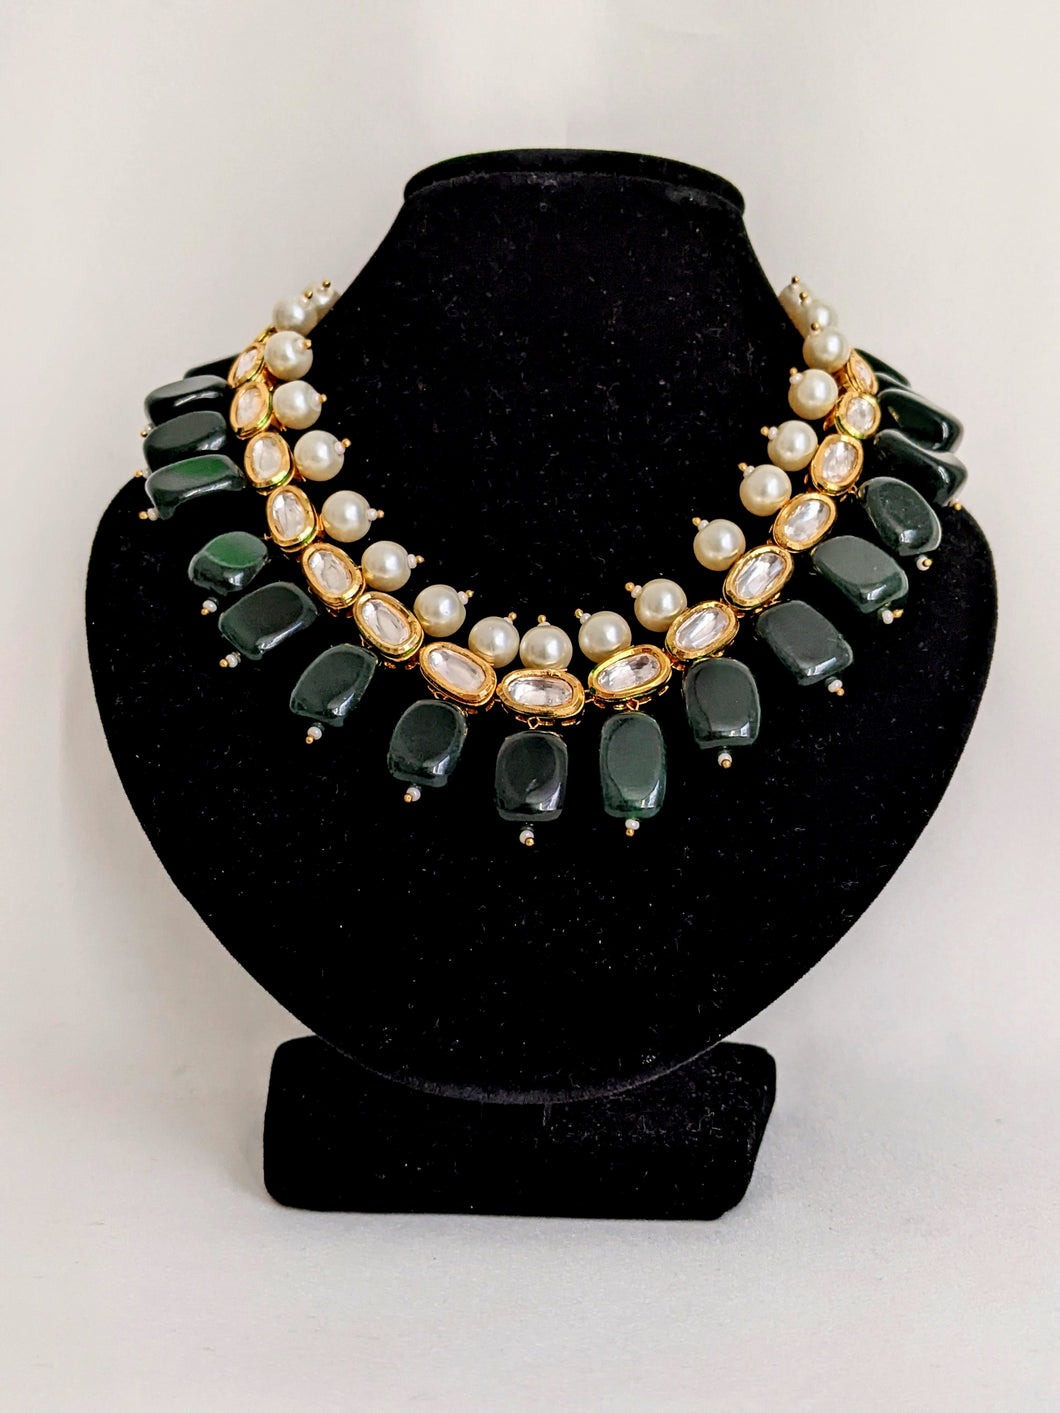 Elegant Kundan Necklace with pearl tops and black Onyx beads, this Kundan Necklace is a classic piece that you don't see often!  With back meenawork, this high quality necklace is rare find.